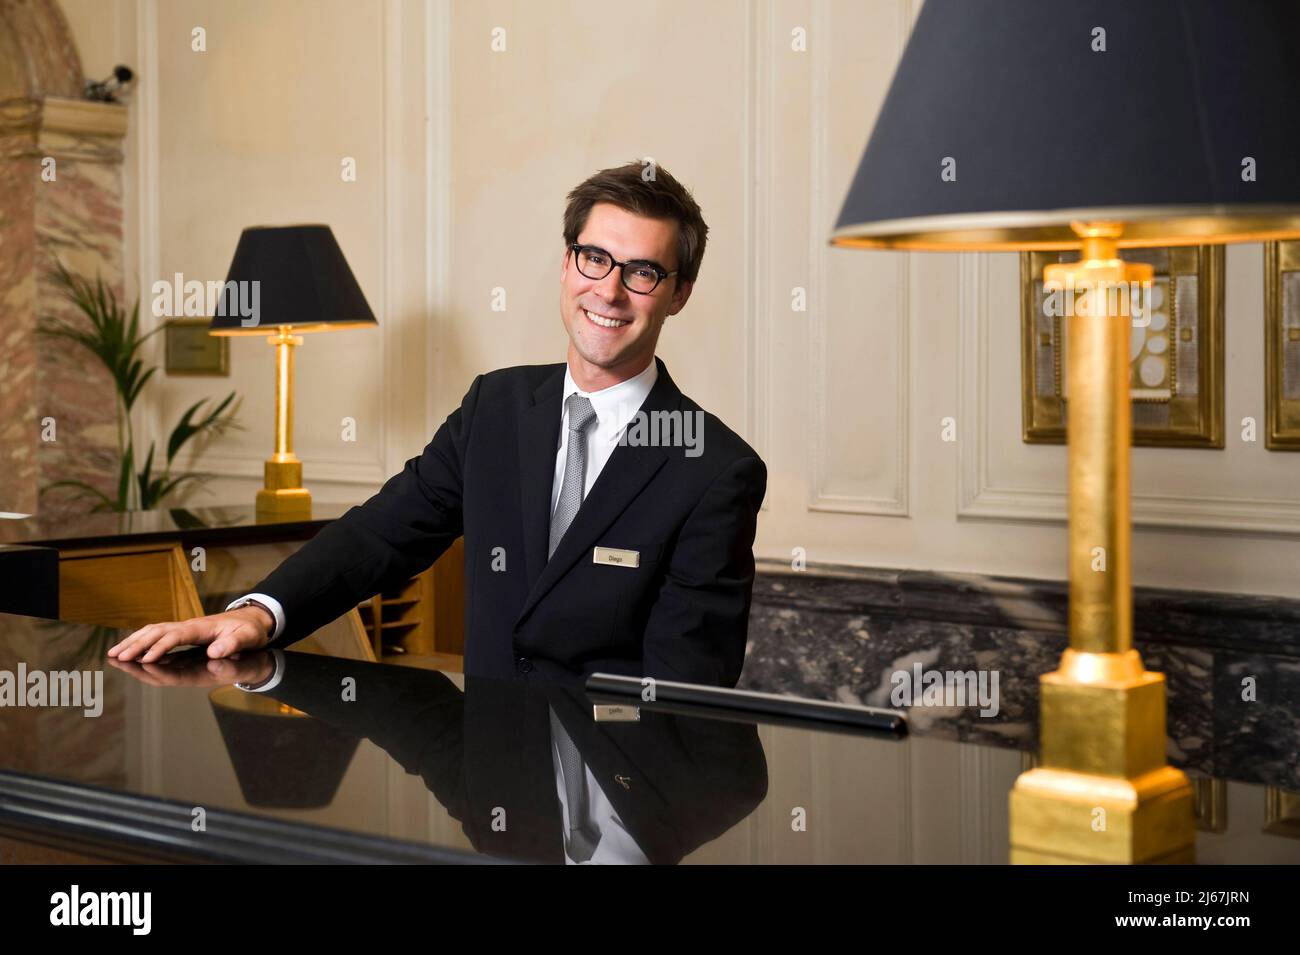 Concierge smiling from the hotel desk Stock Photo